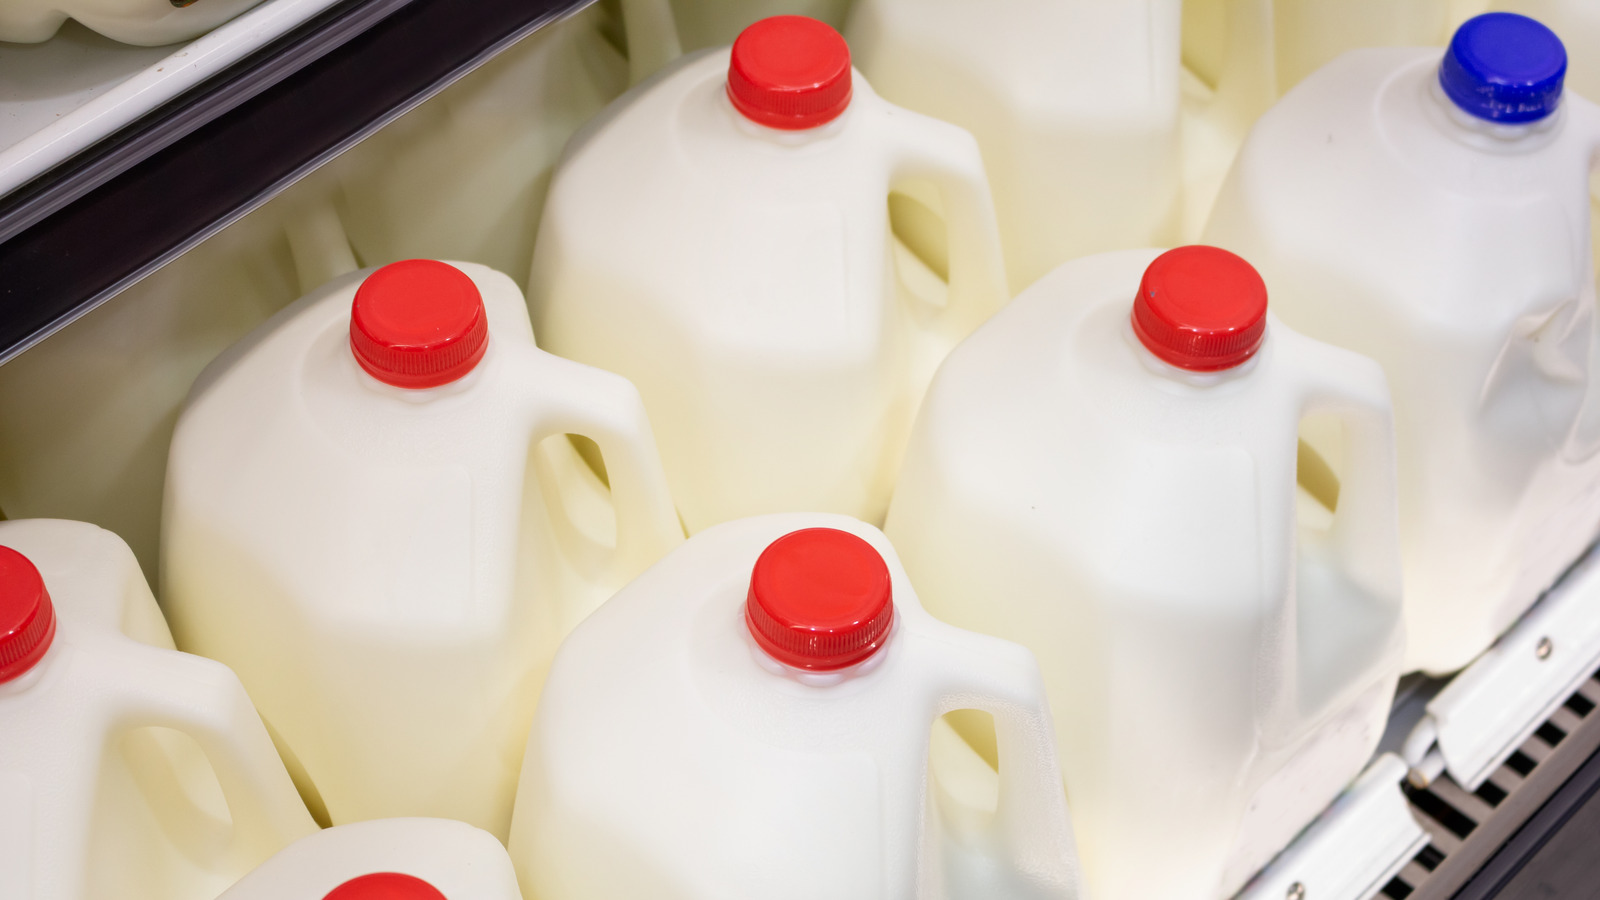 Affordable milk products